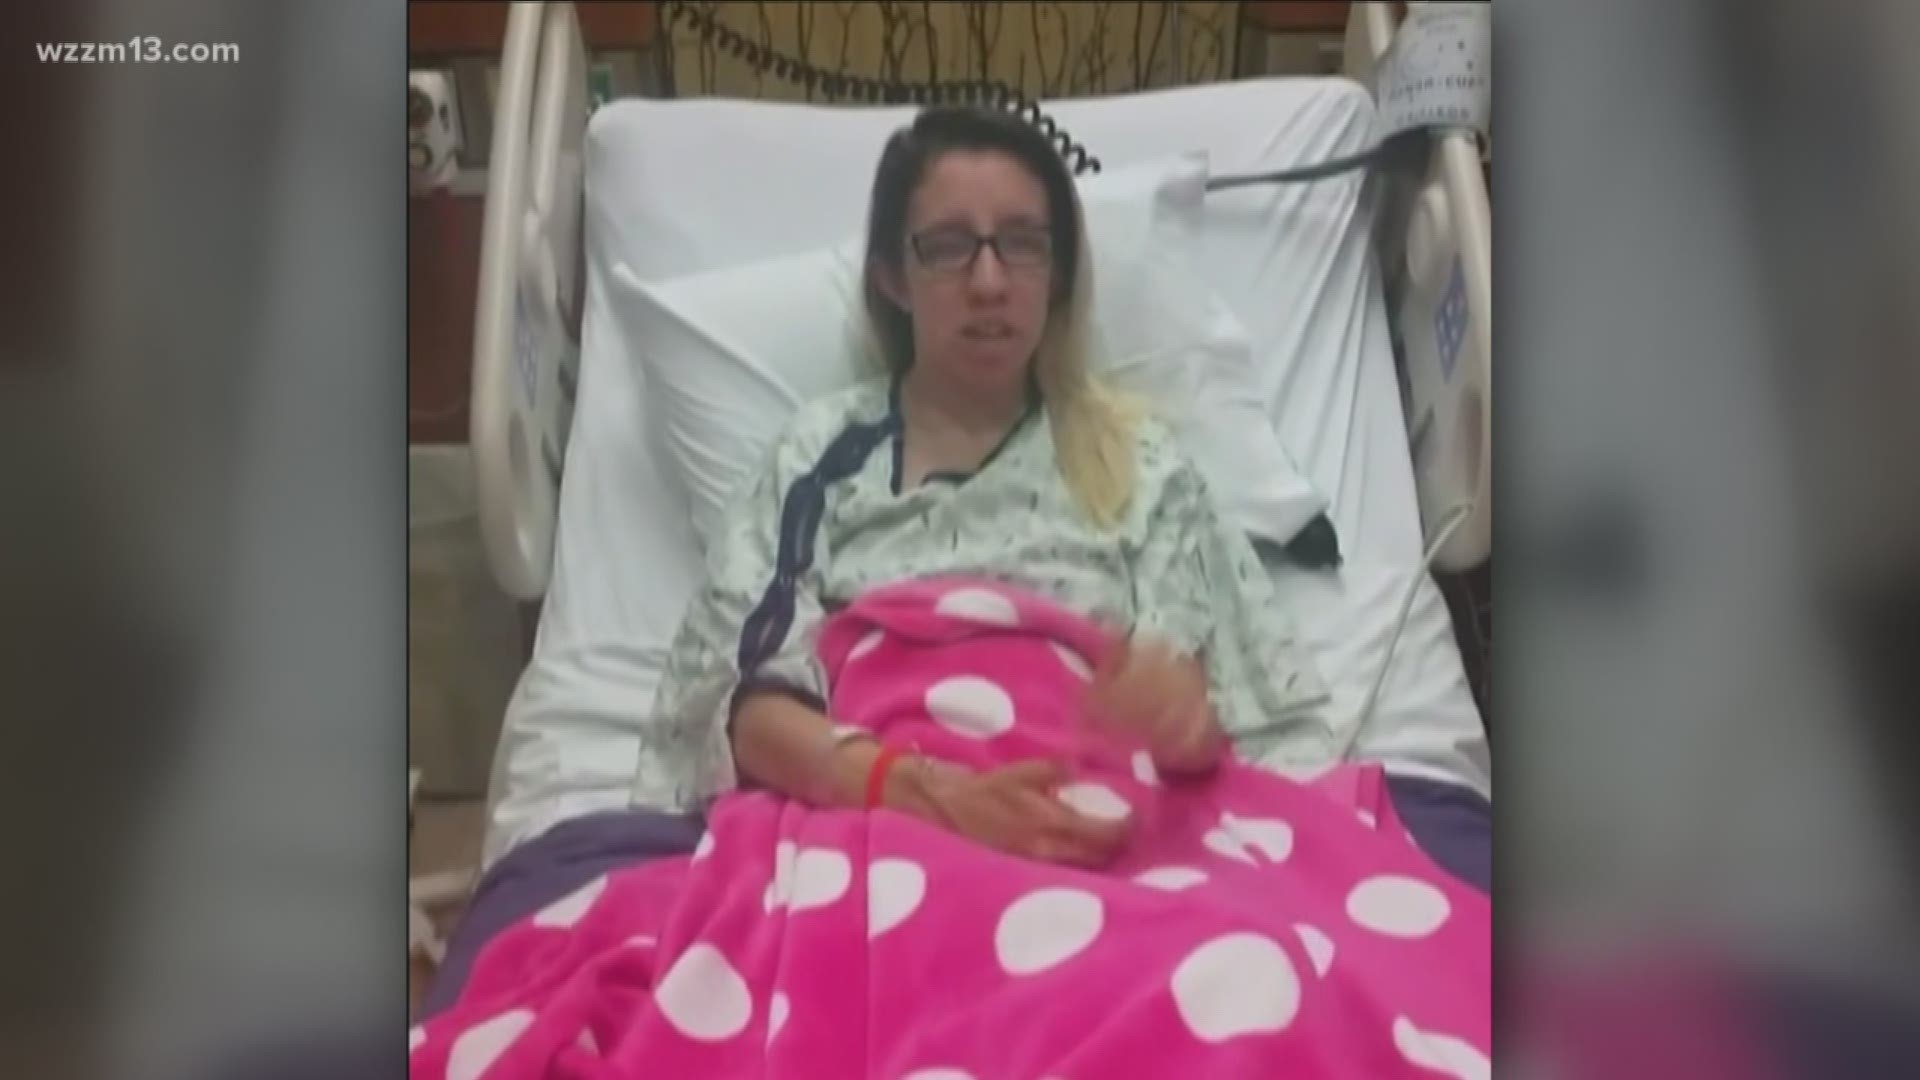 Family reacts to kidney donation